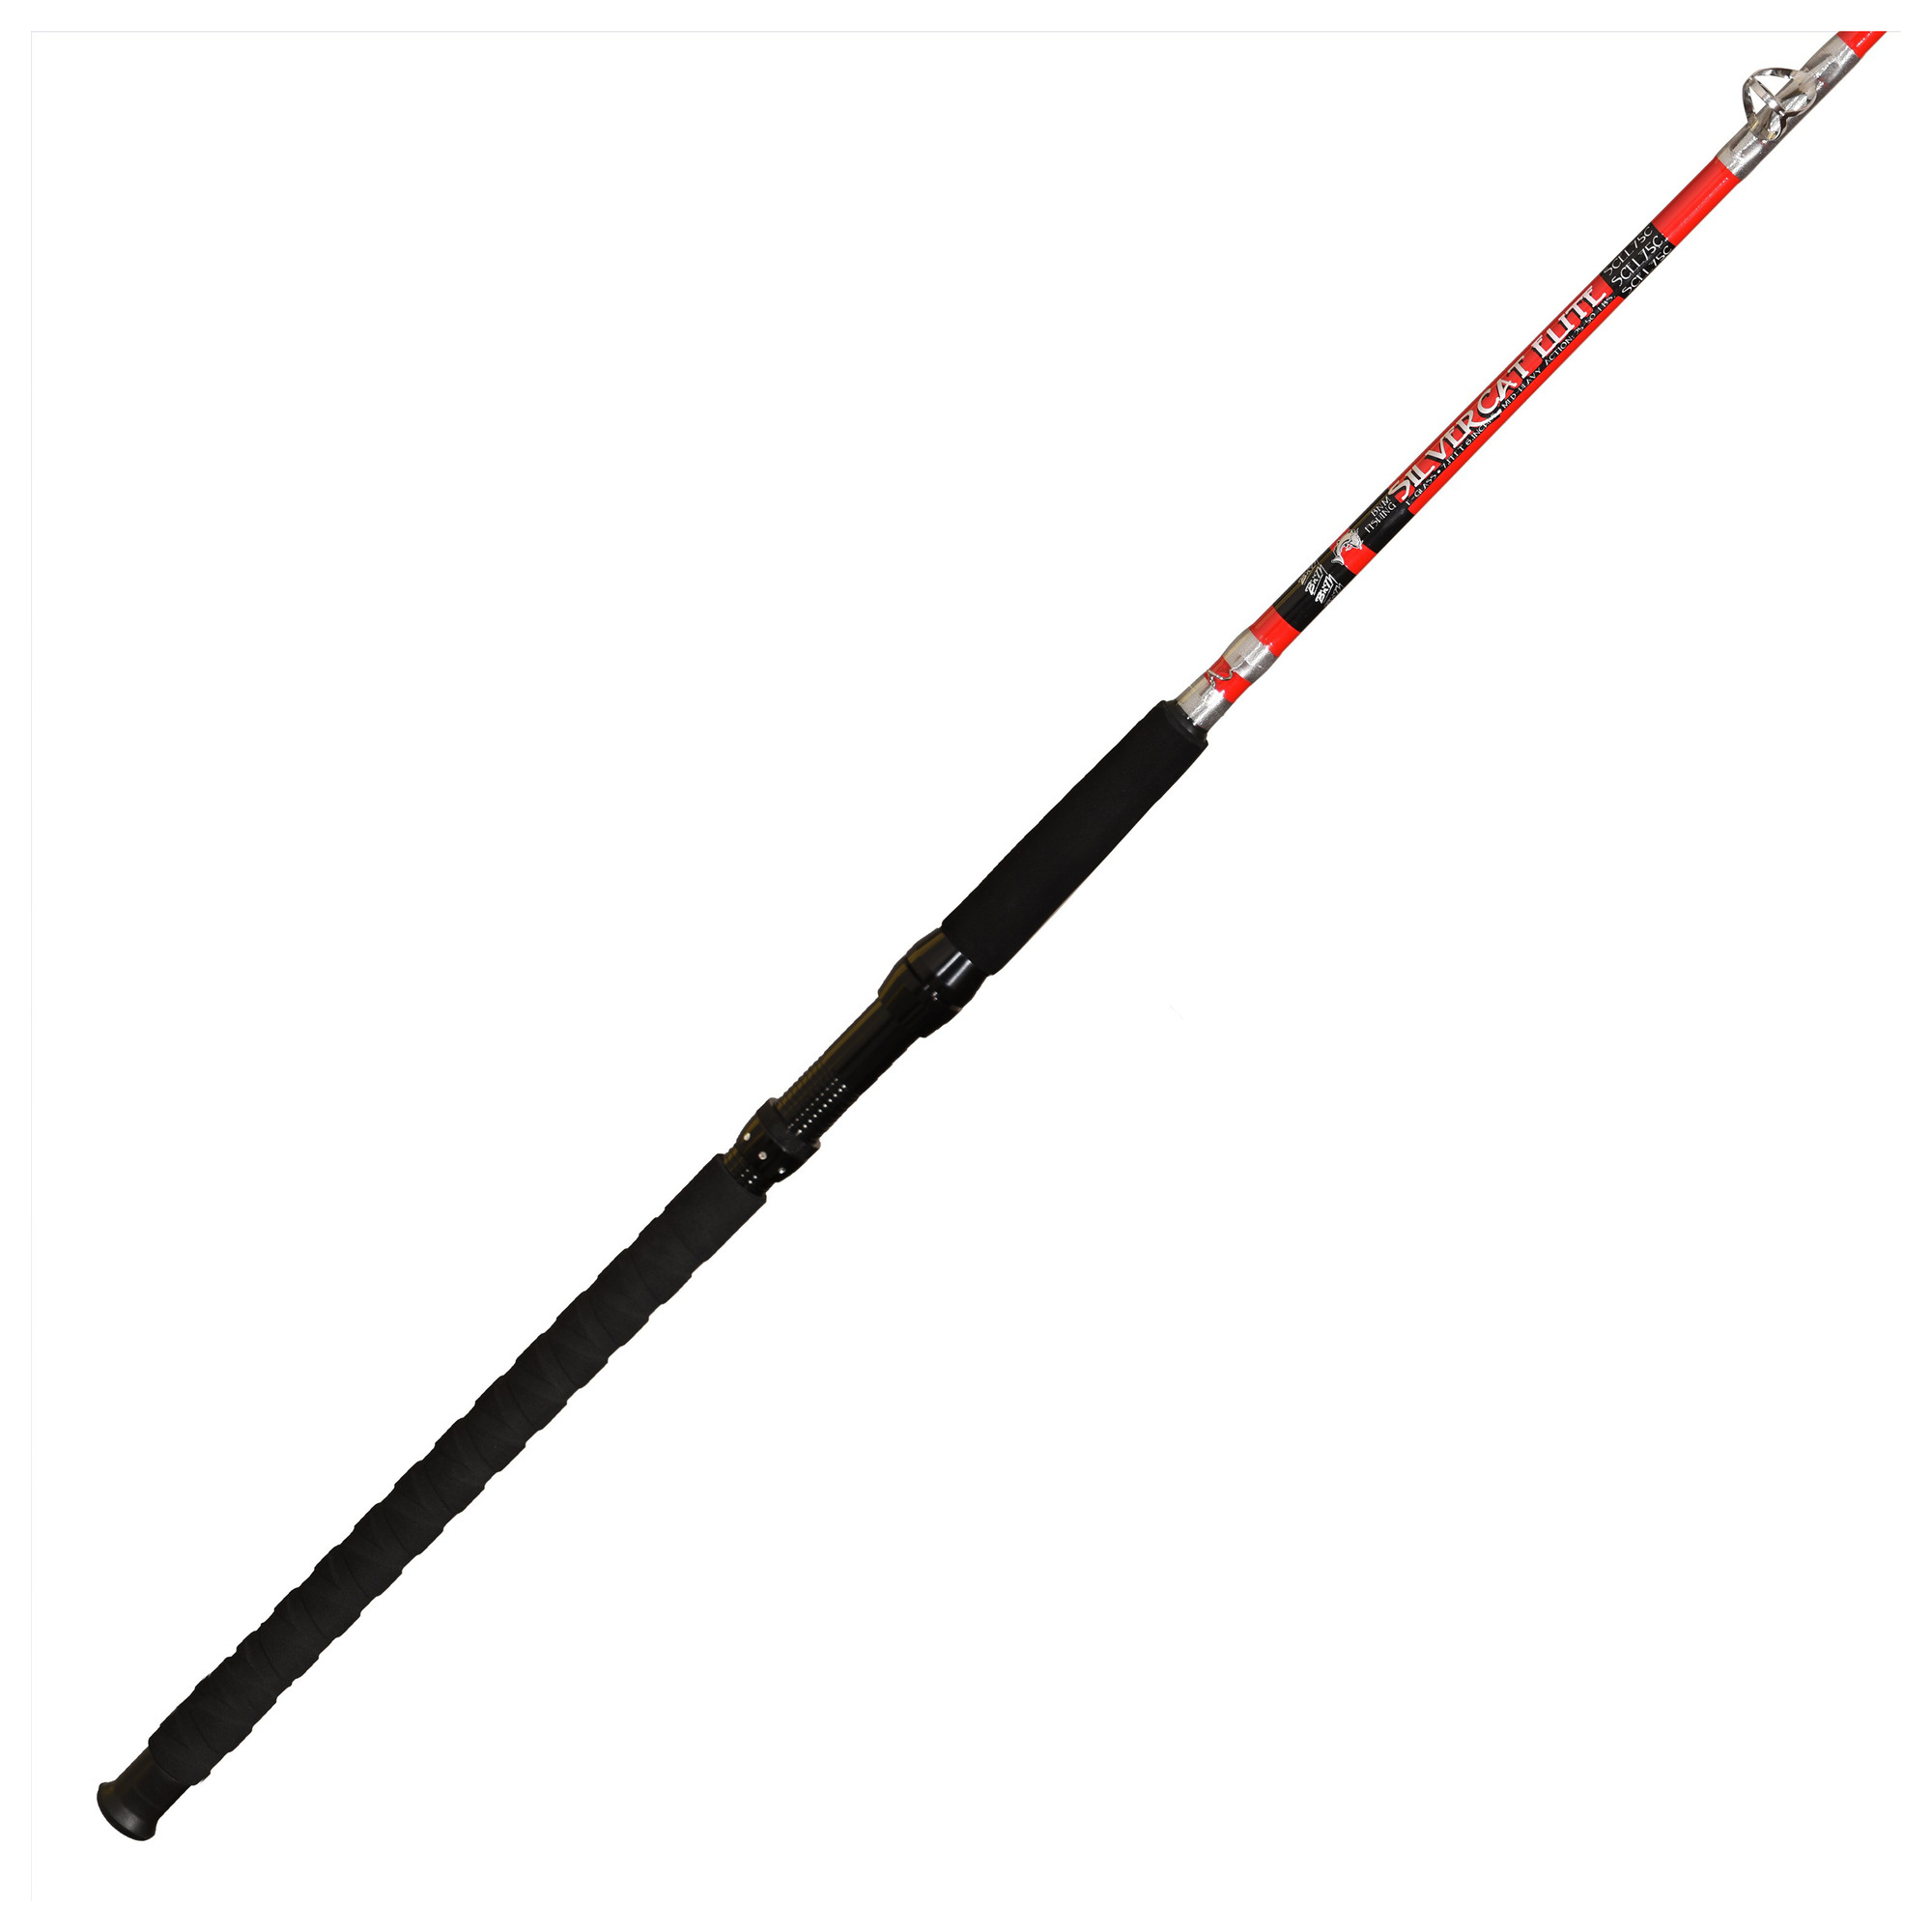 B'n'M Silver Cat Elite 1 Piece Rod SCEL75c , $8.00 Off with Free S&H —  CampSaver